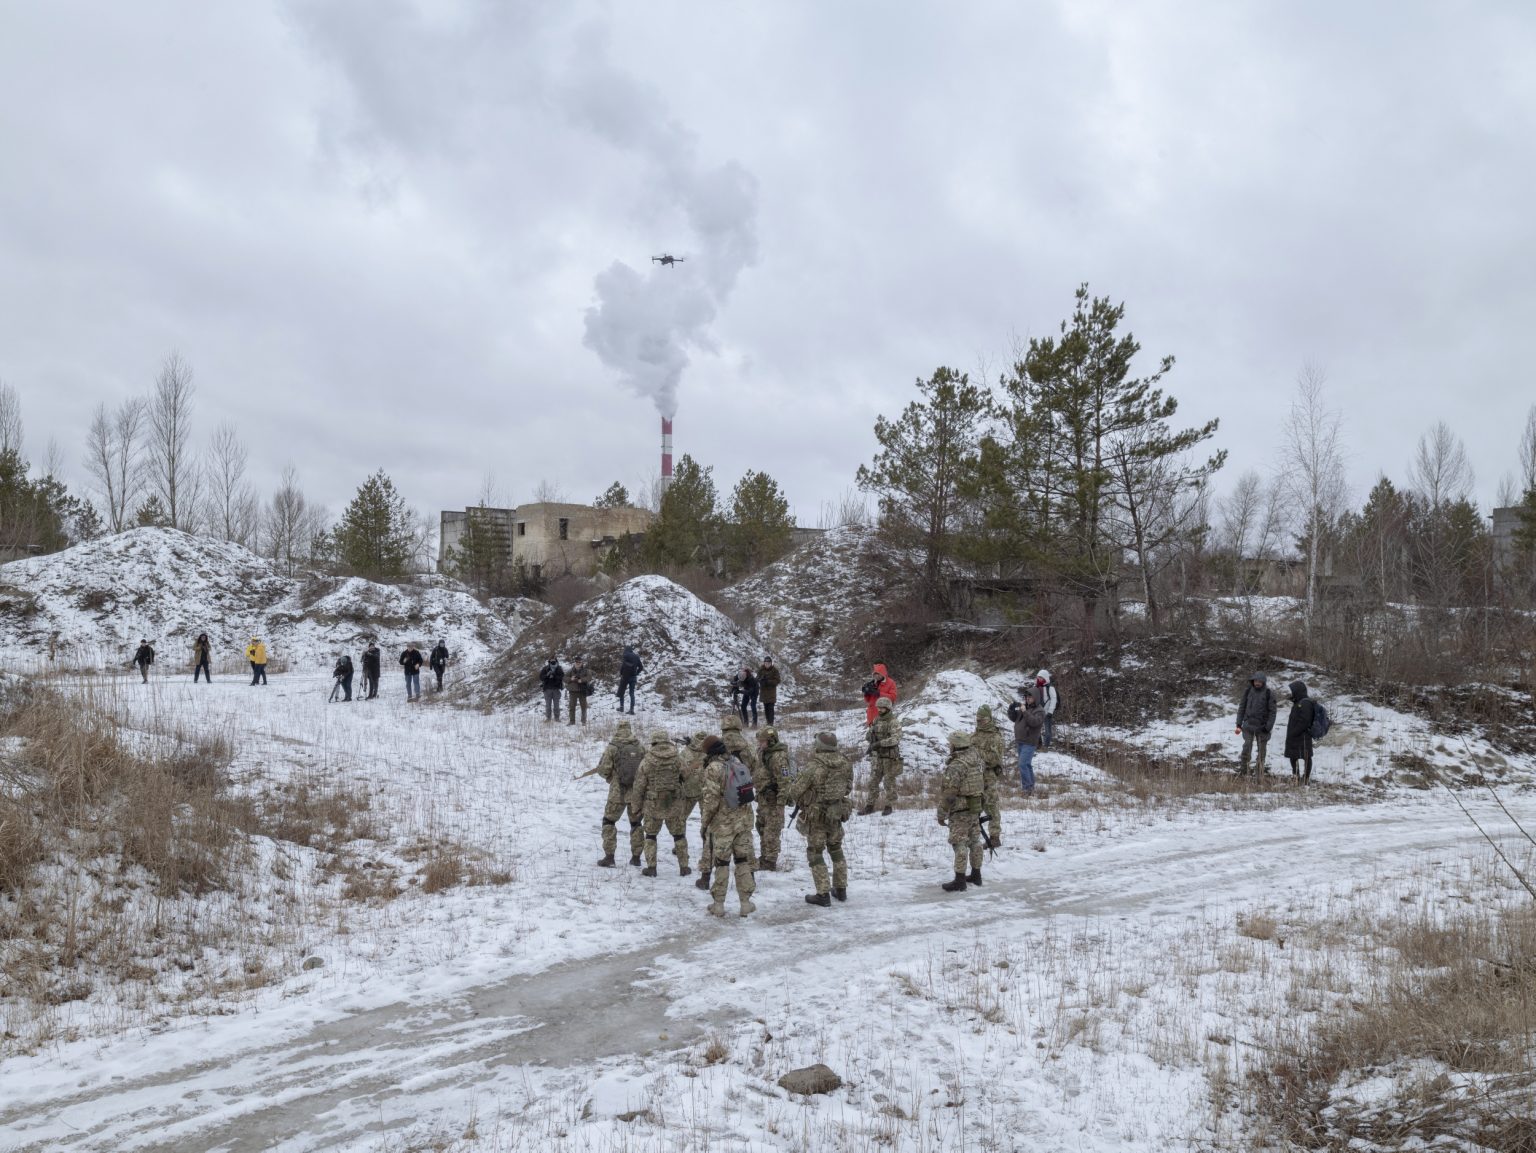 Ukraine, Kiev, January 2022: the 130th Batallion of Territorial Defence Forces during a training in Dresna area located in the north of the city.